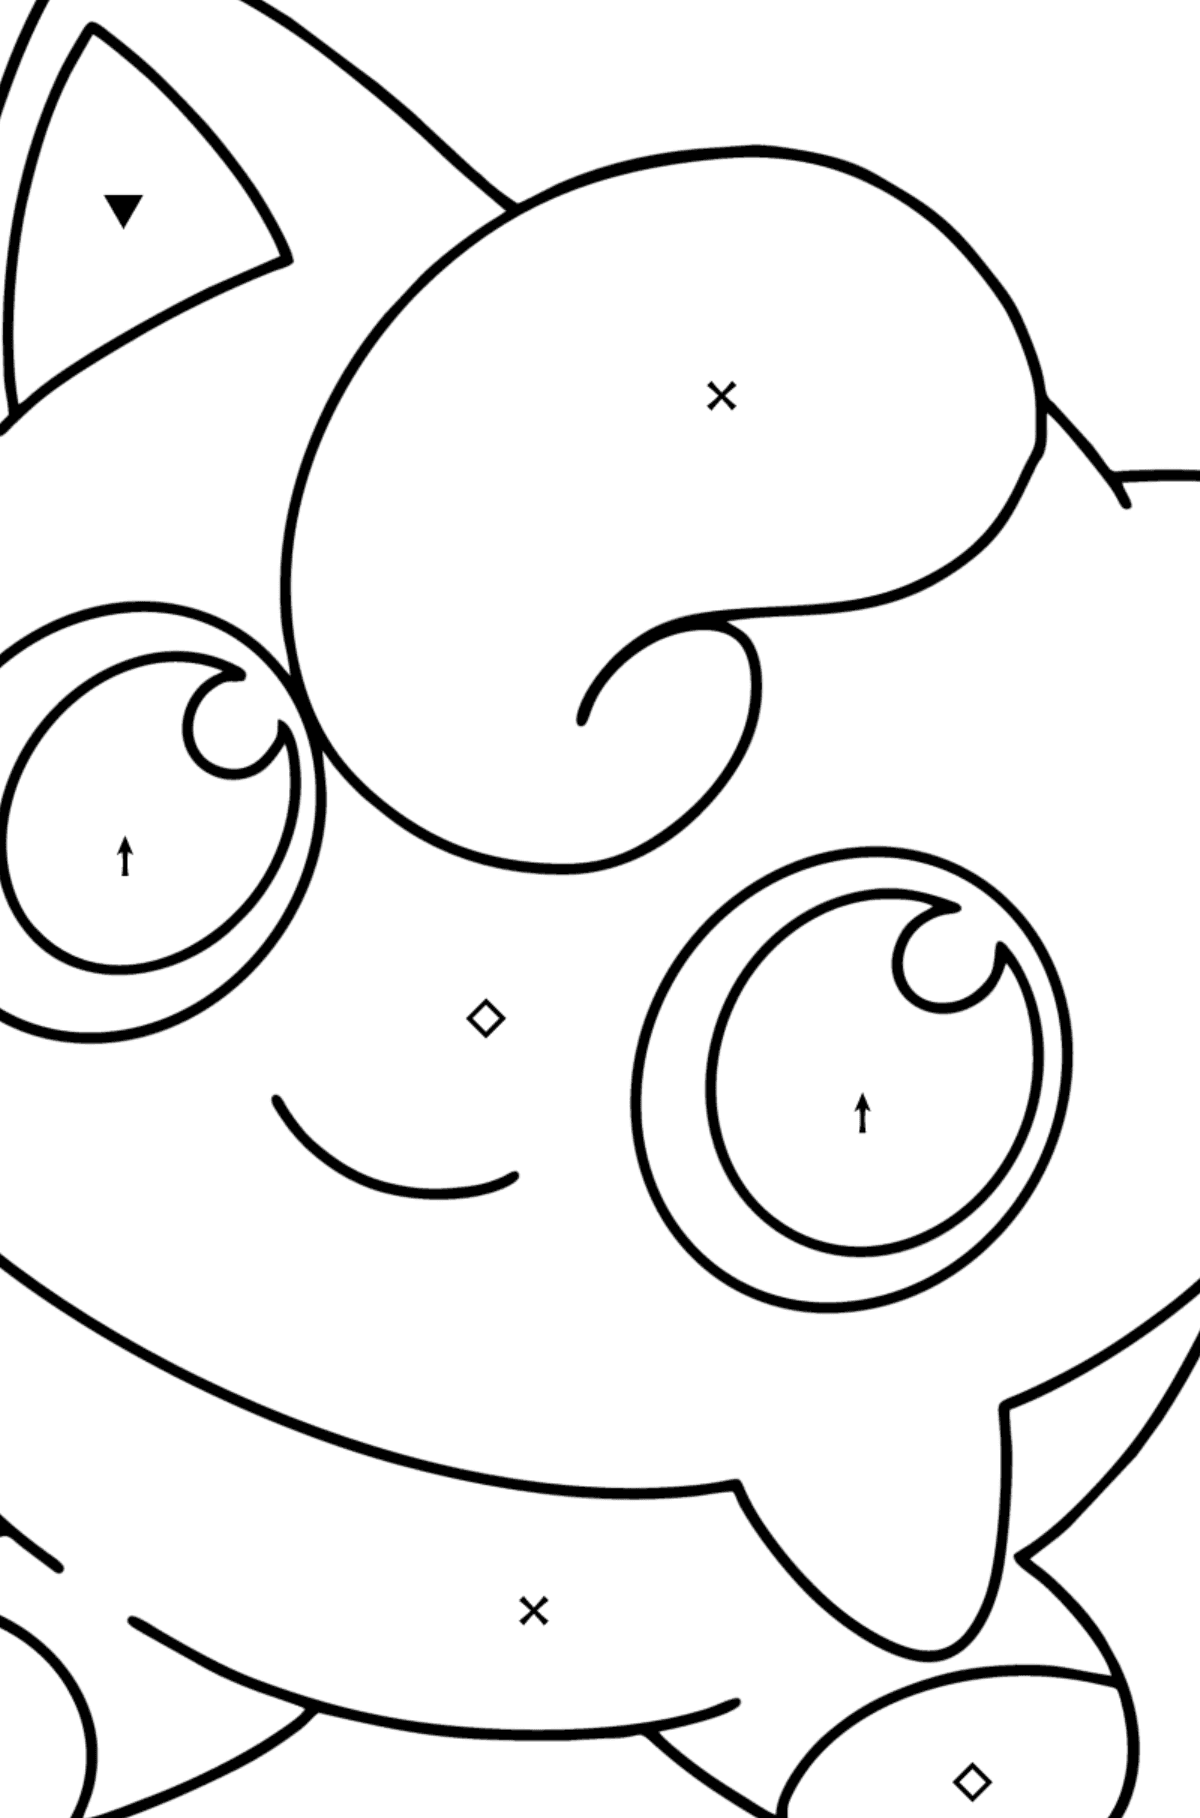 Coloring page Pokémon Go Jigglypuff - Coloring by Symbols for Kids